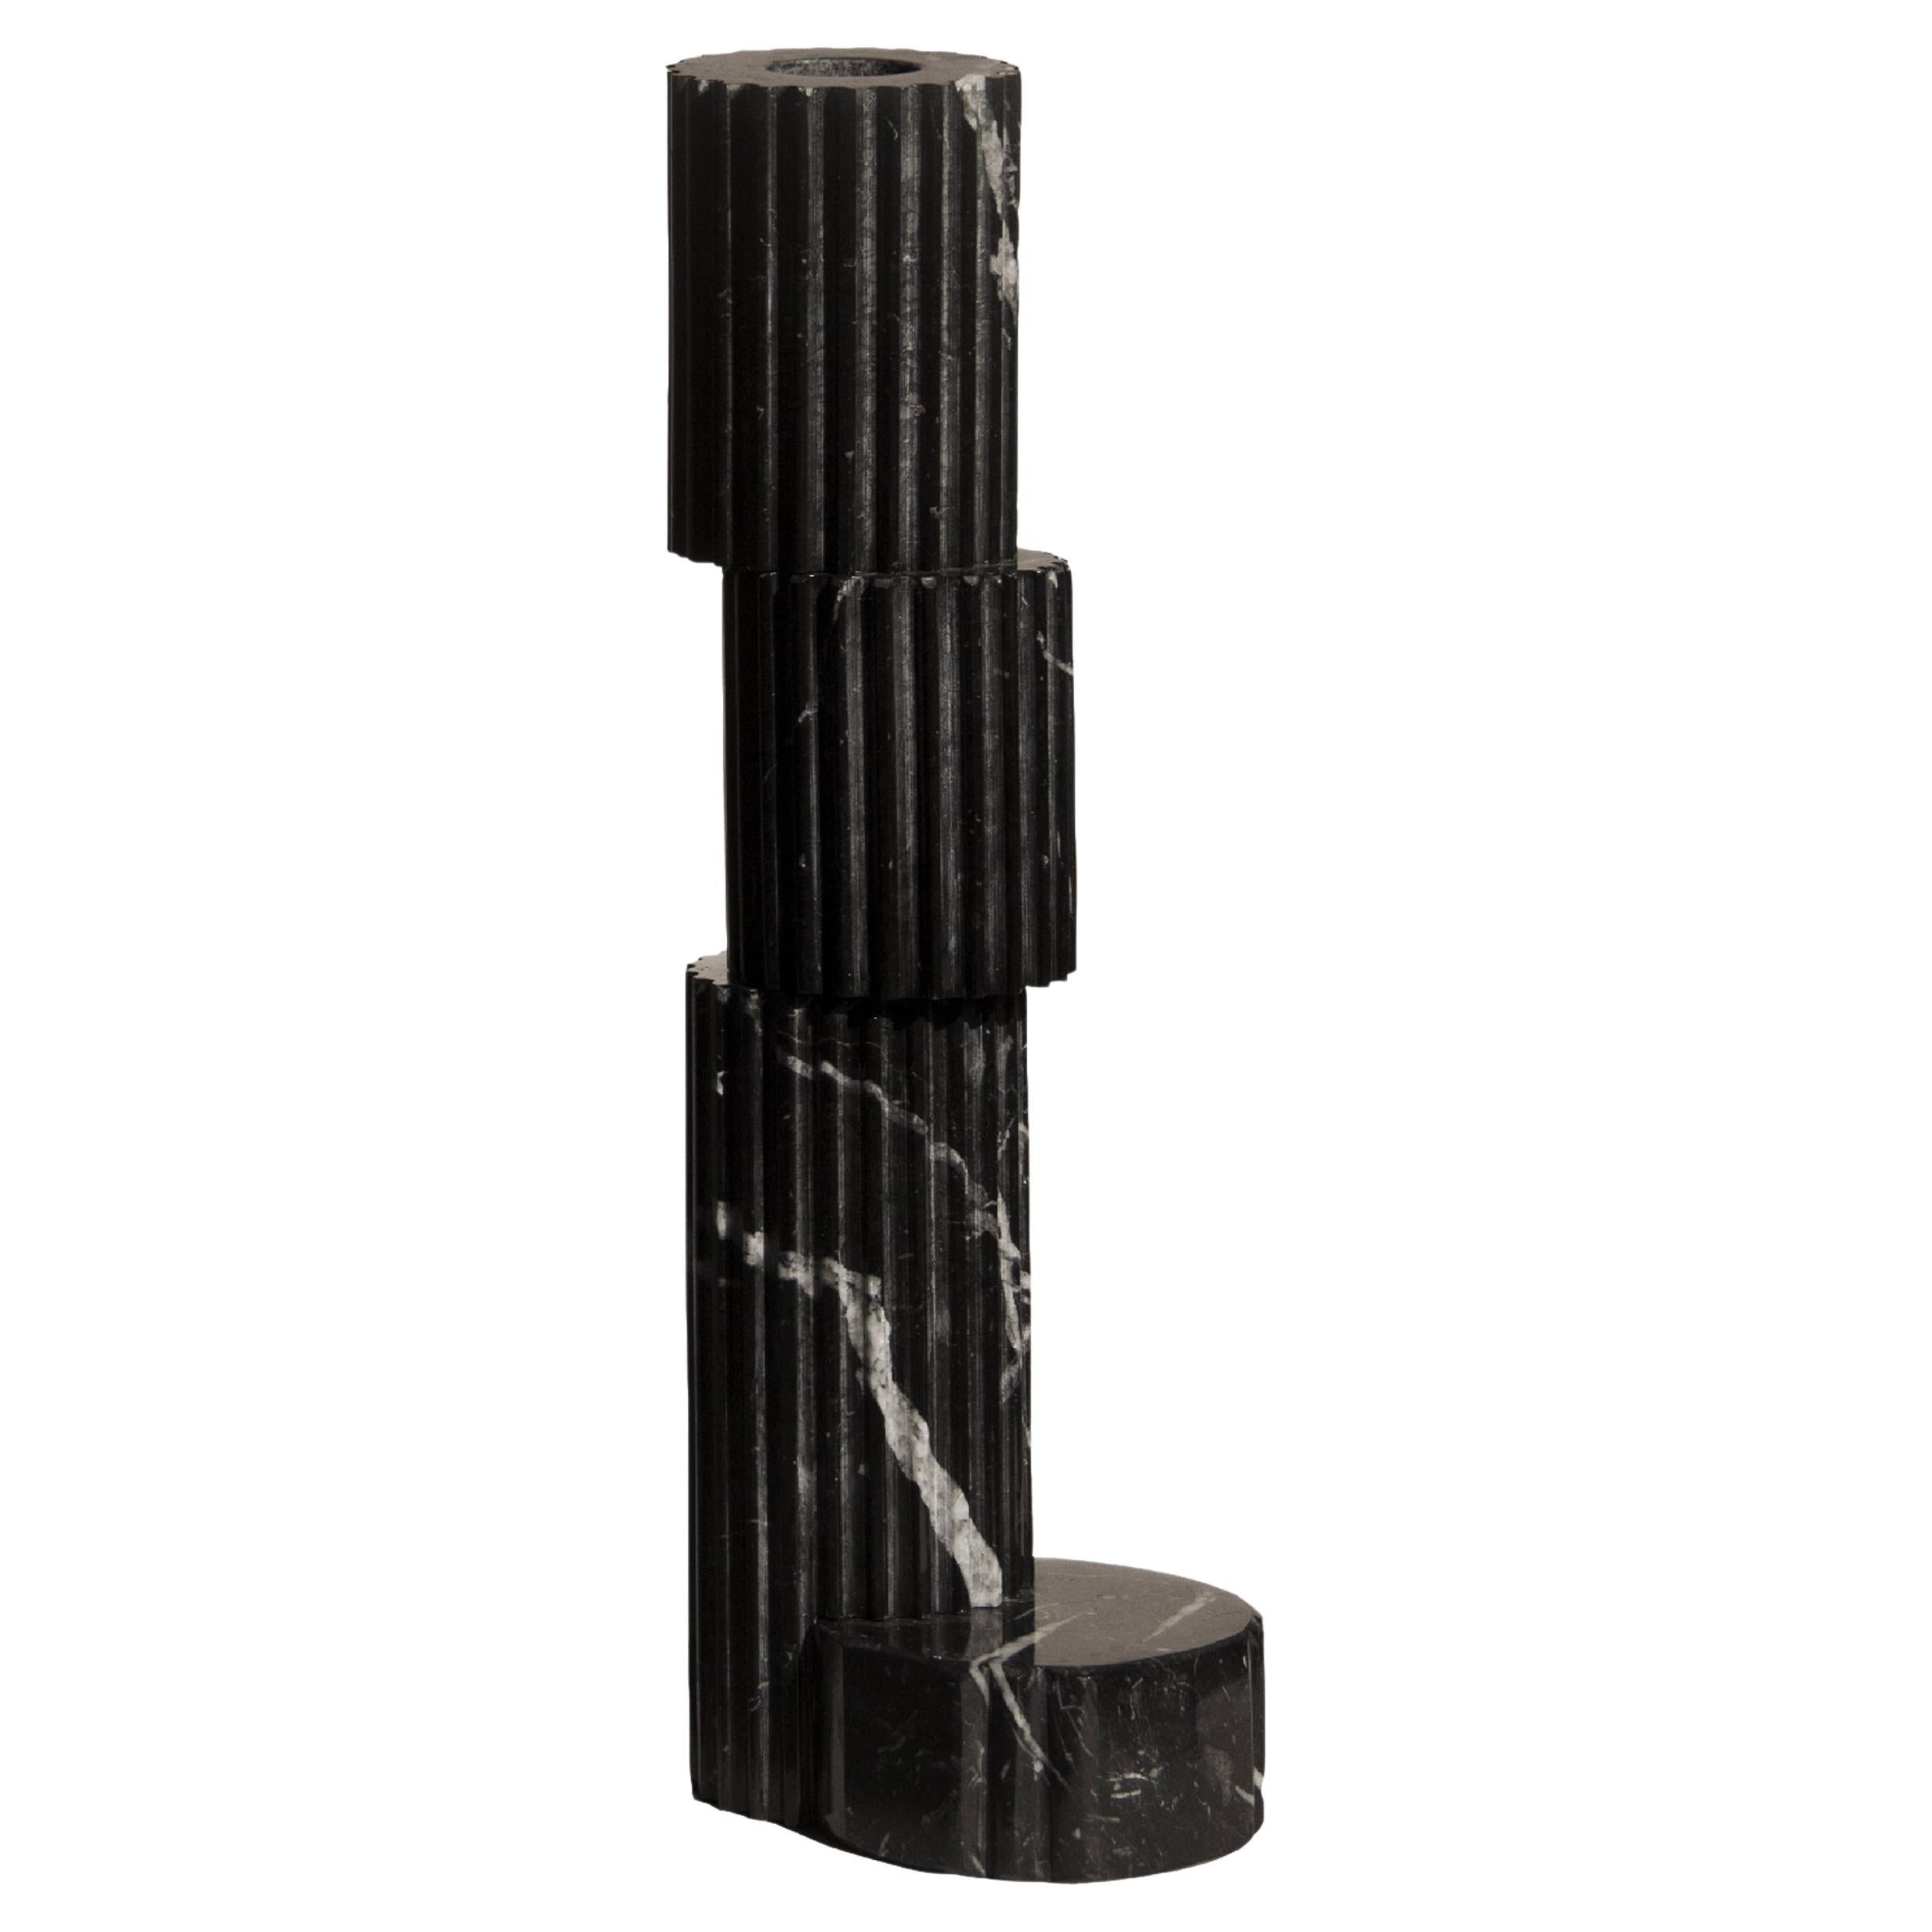 21Century Marquinia Marble Candle Holder - 1 IN STOCK AVAILABLE NOW!